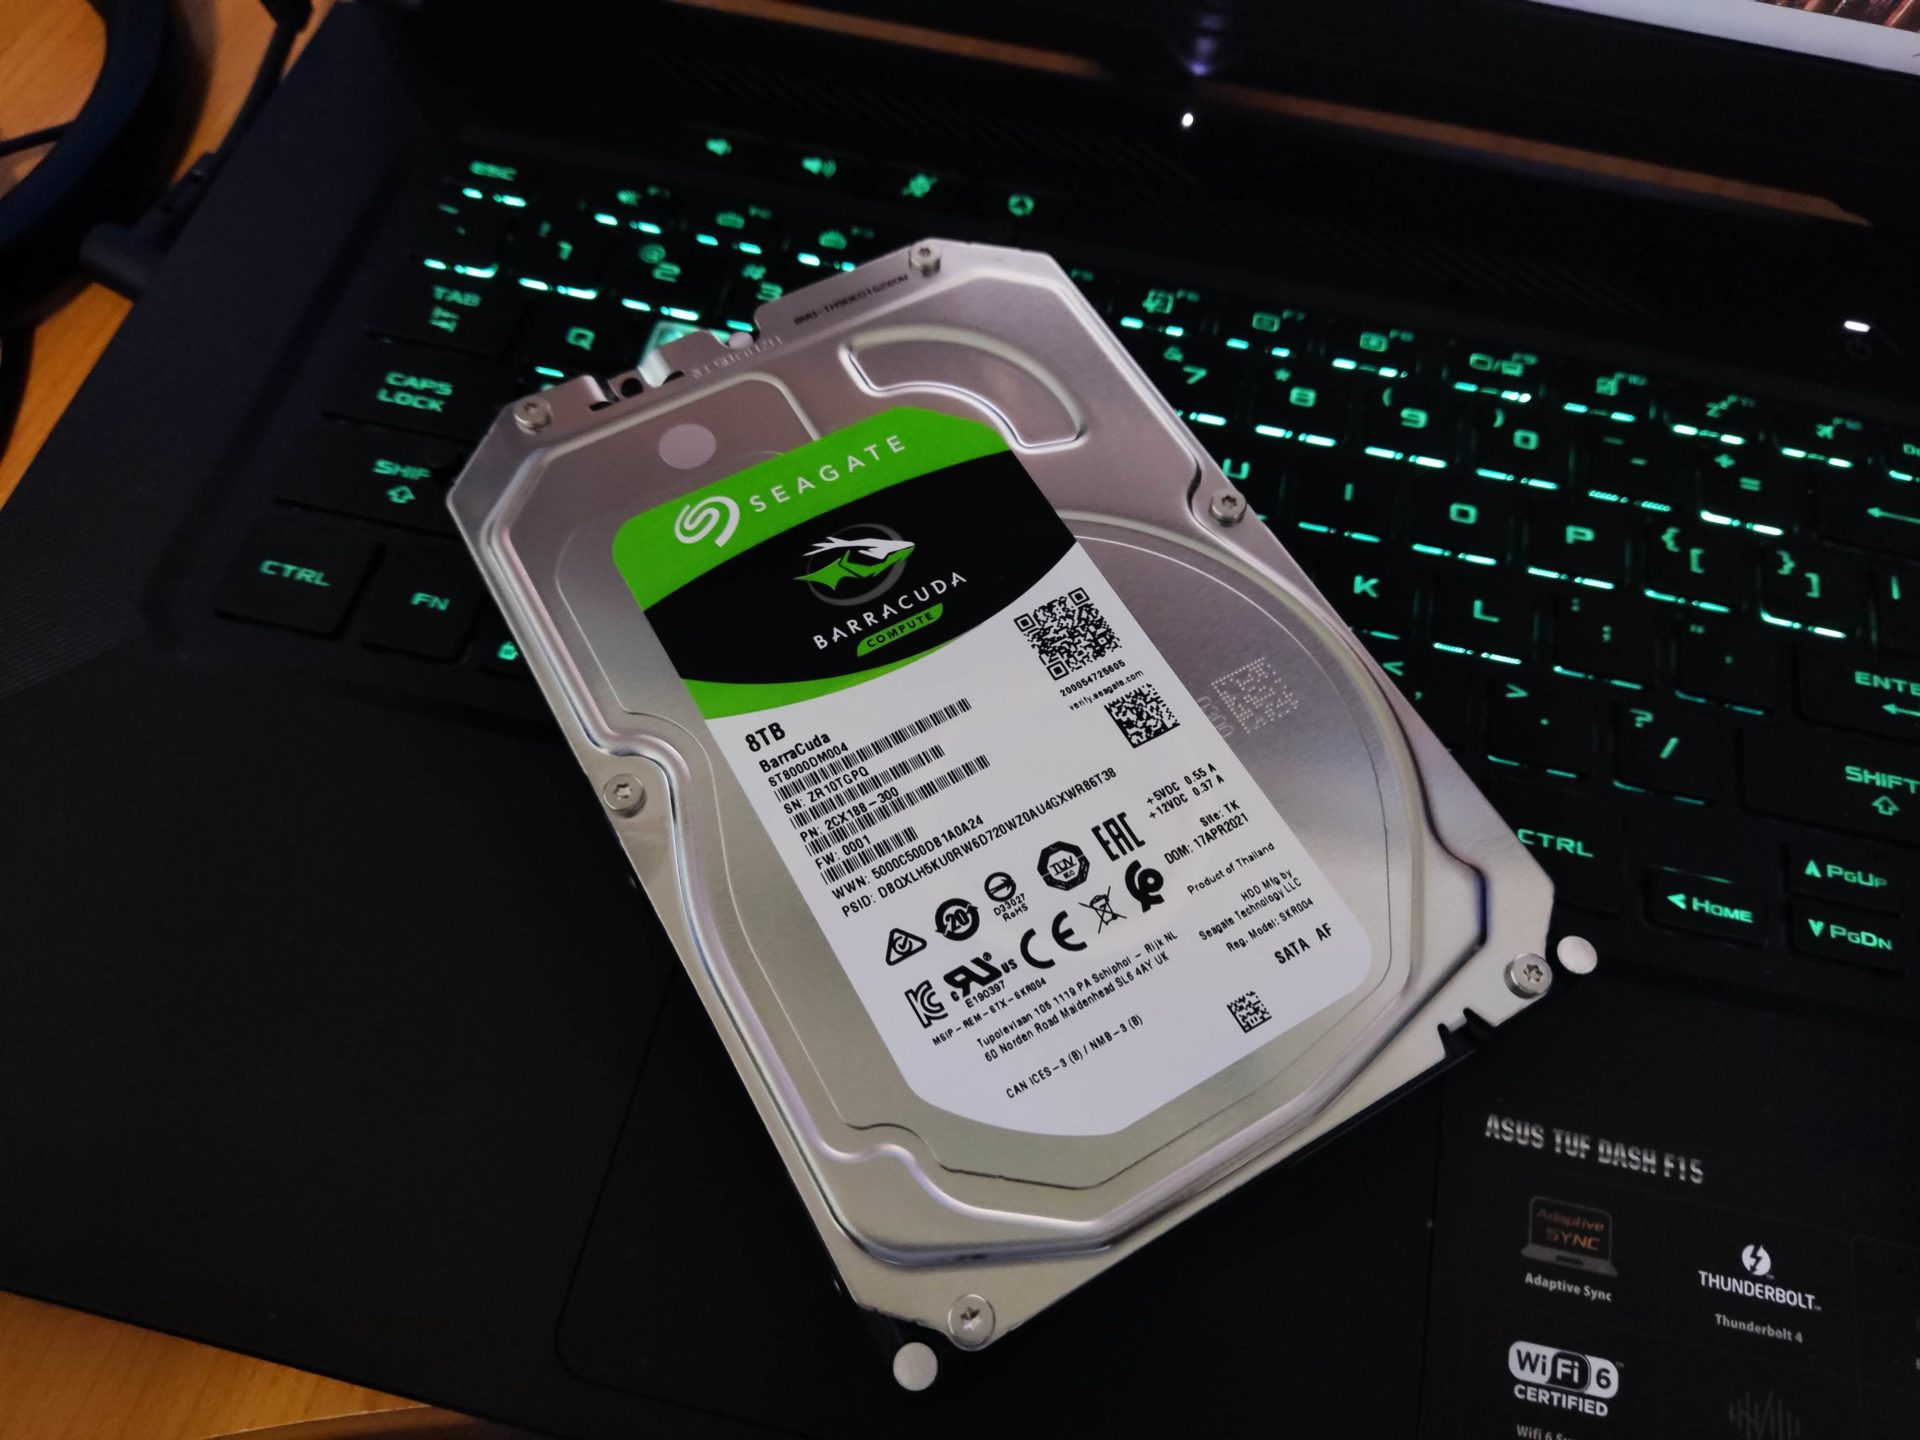 Seagate Barracuda 4TB Hard Drive Review: The Best Gaming HDD of 2023 